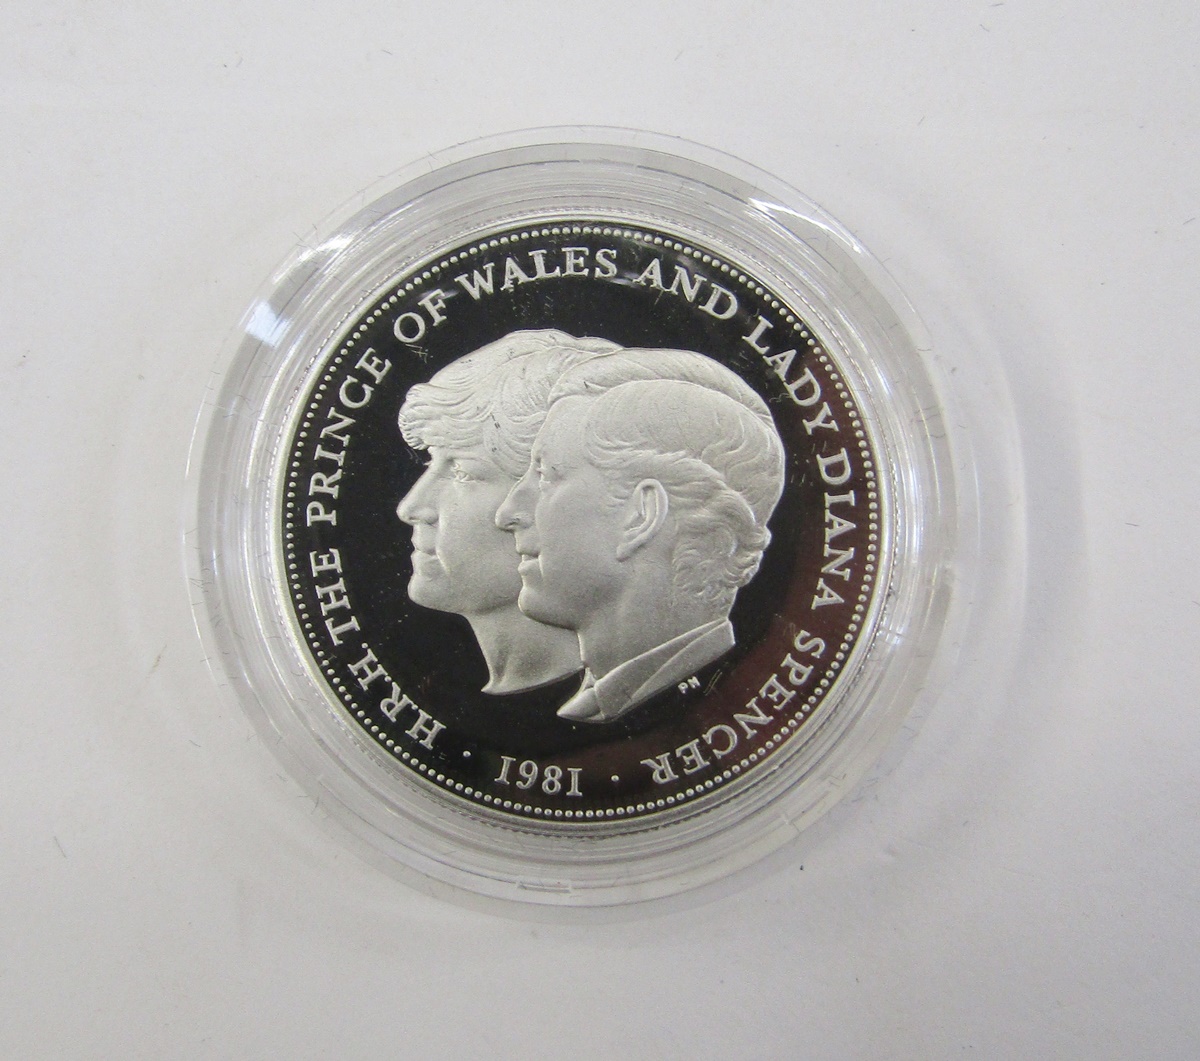 Proof silver coins, a collection of 4 silver Crowns, 1972 EP Crown, 1977 Silver Jubilee Crown, - Image 3 of 5